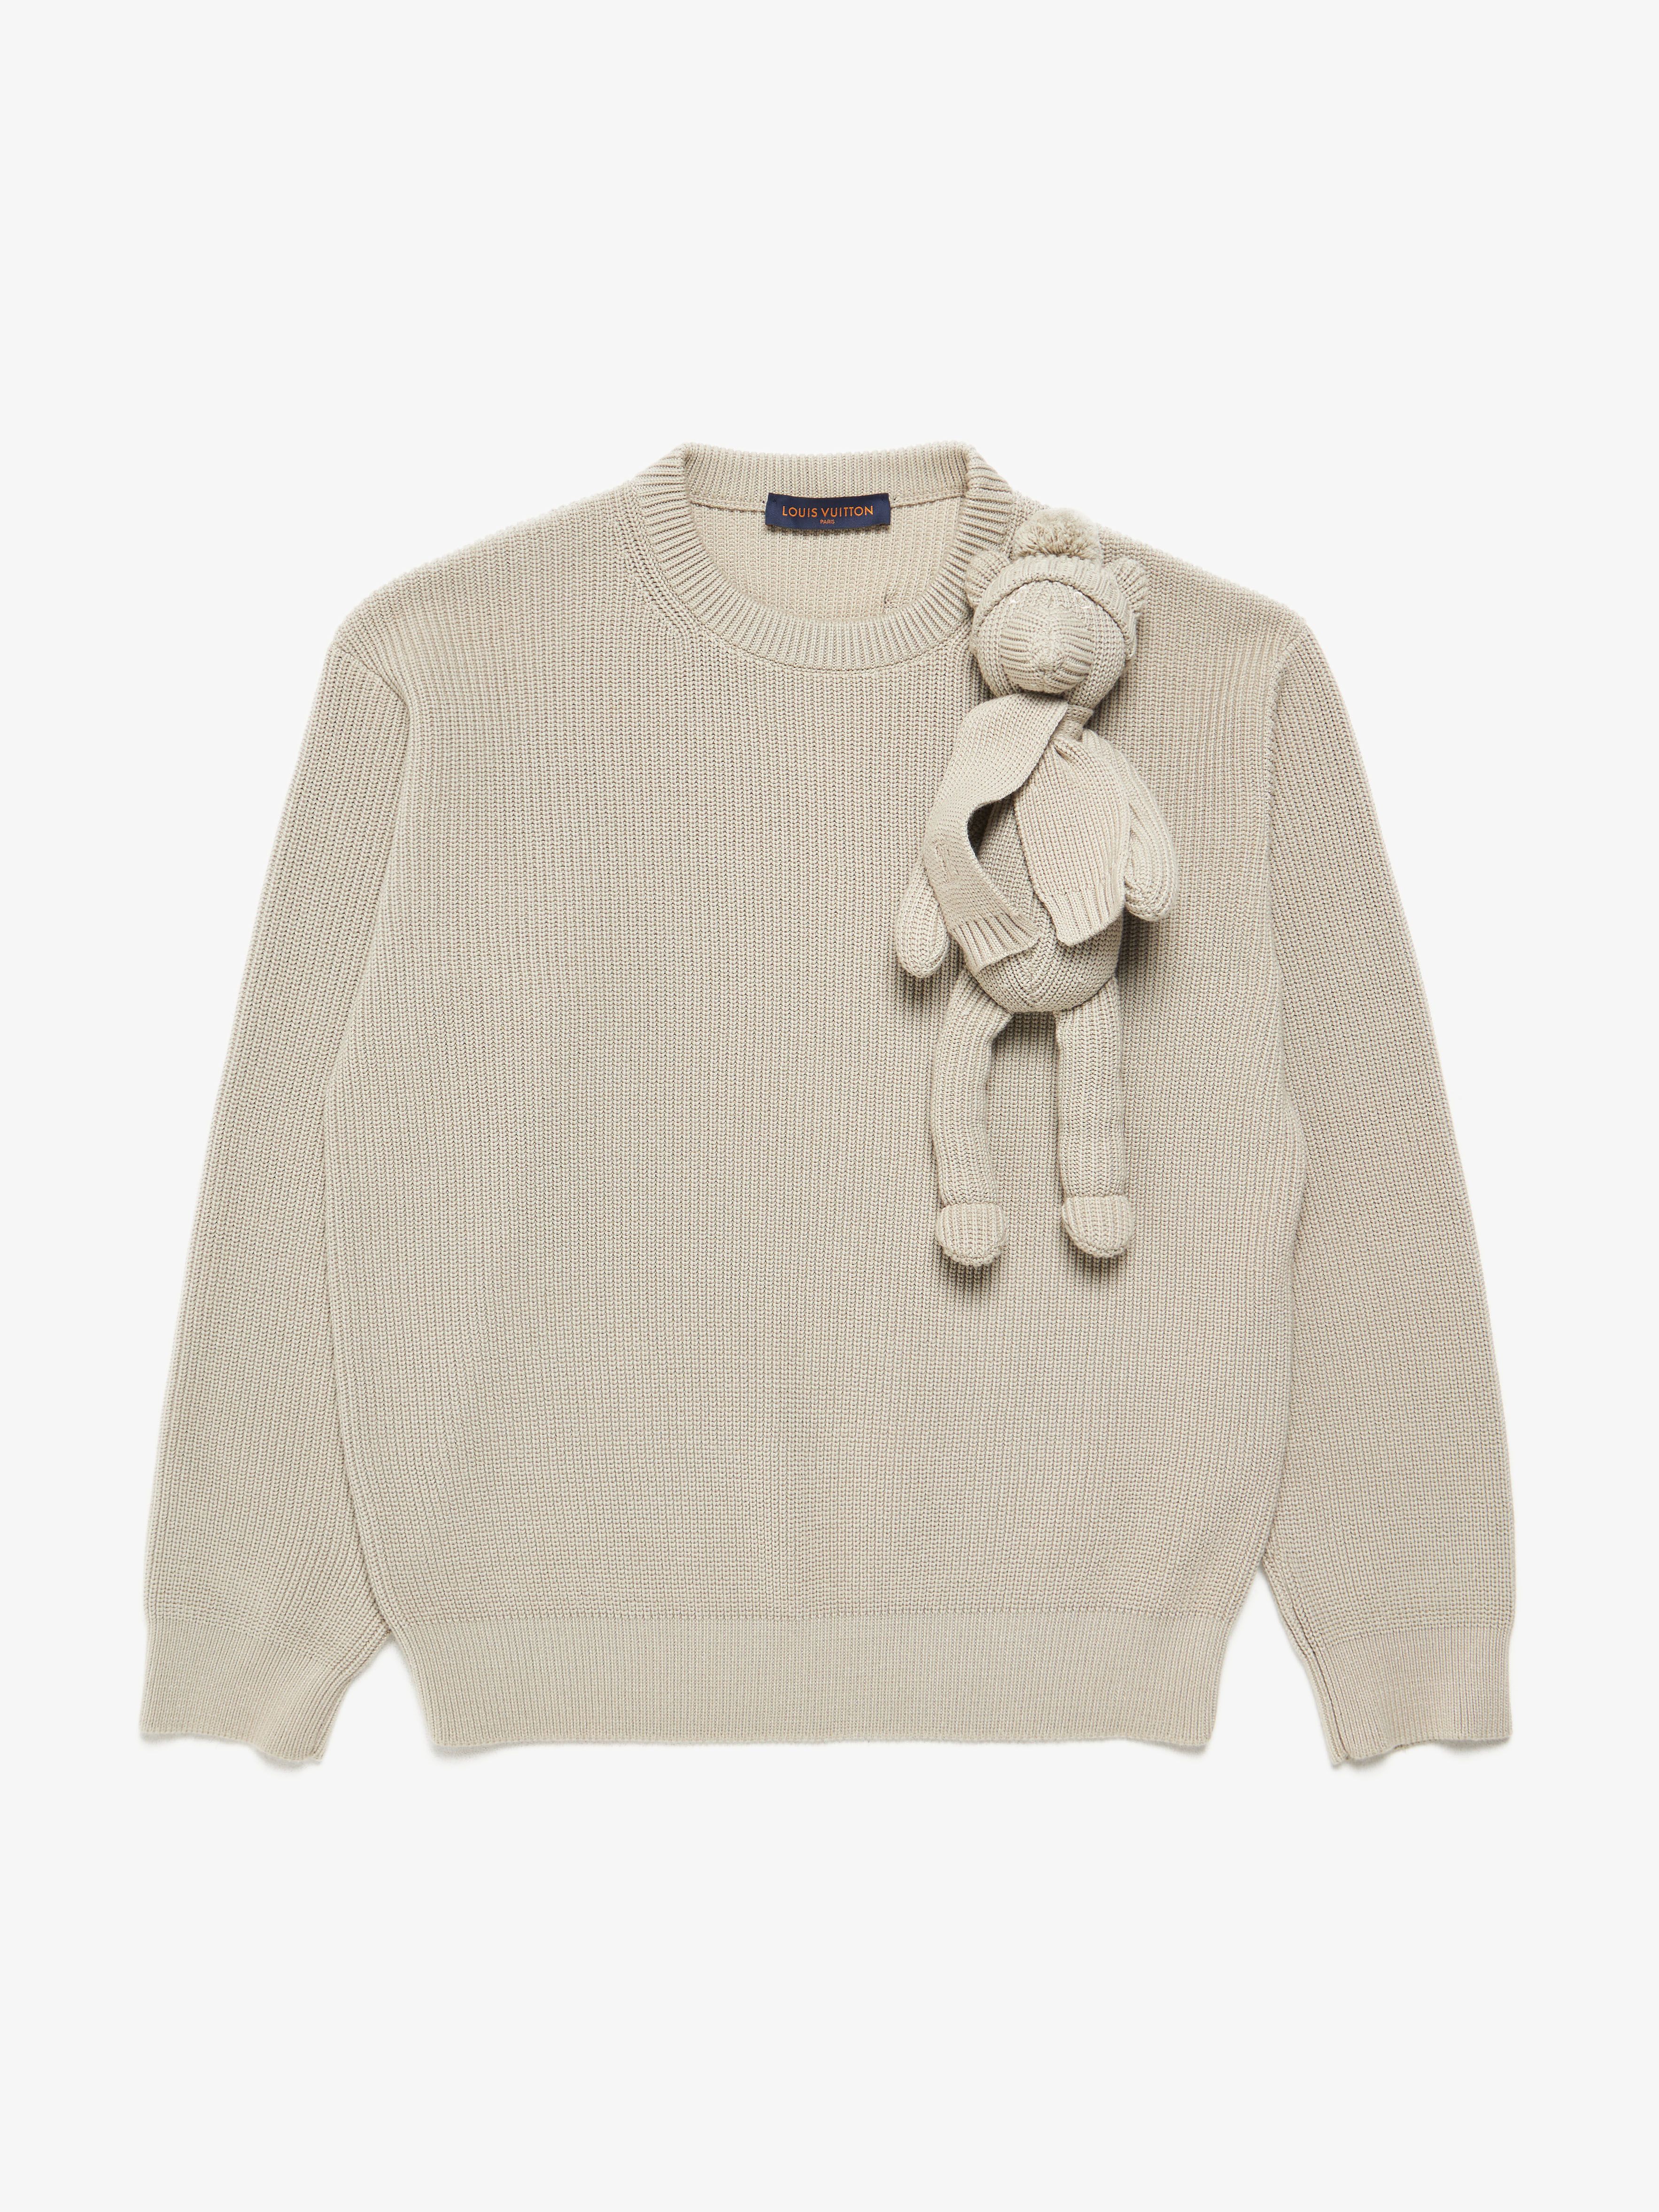 Louis Vuitton Teddy puppet toy doll knit sweater, c99